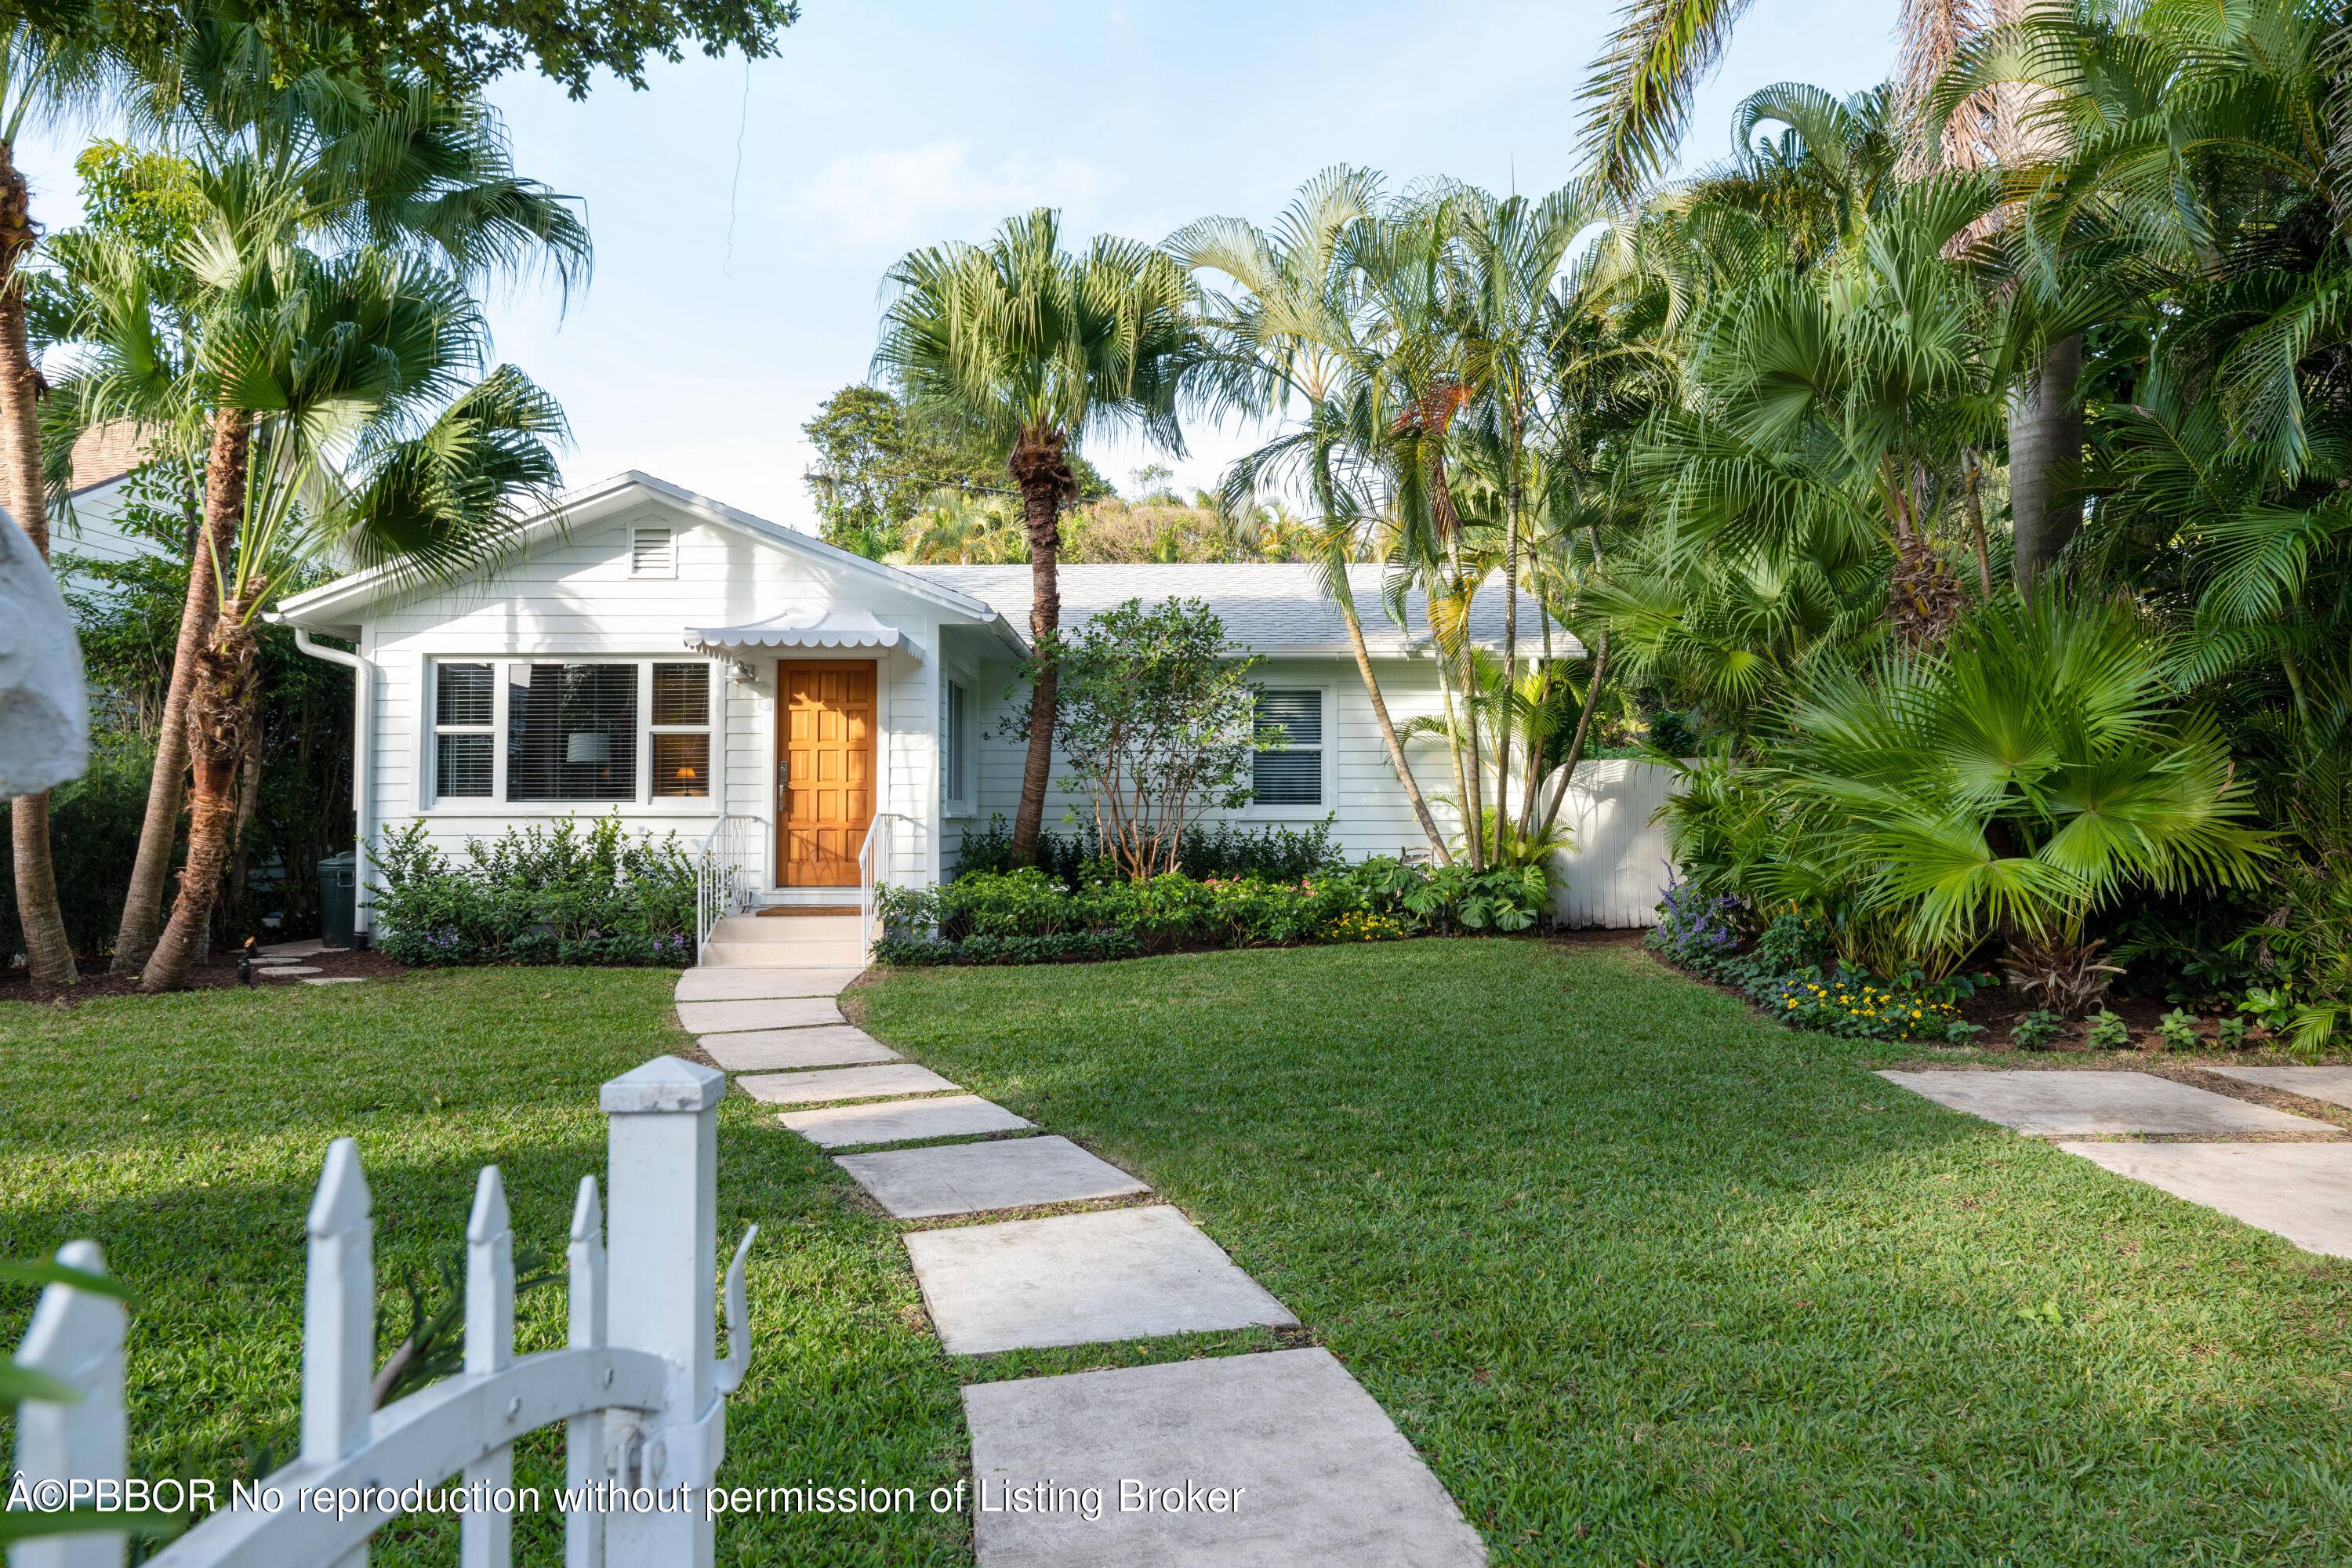 Very chic and charming and 4BR 3BA home, Bright rooms with formal dining room, pool and Cabana Loggia.